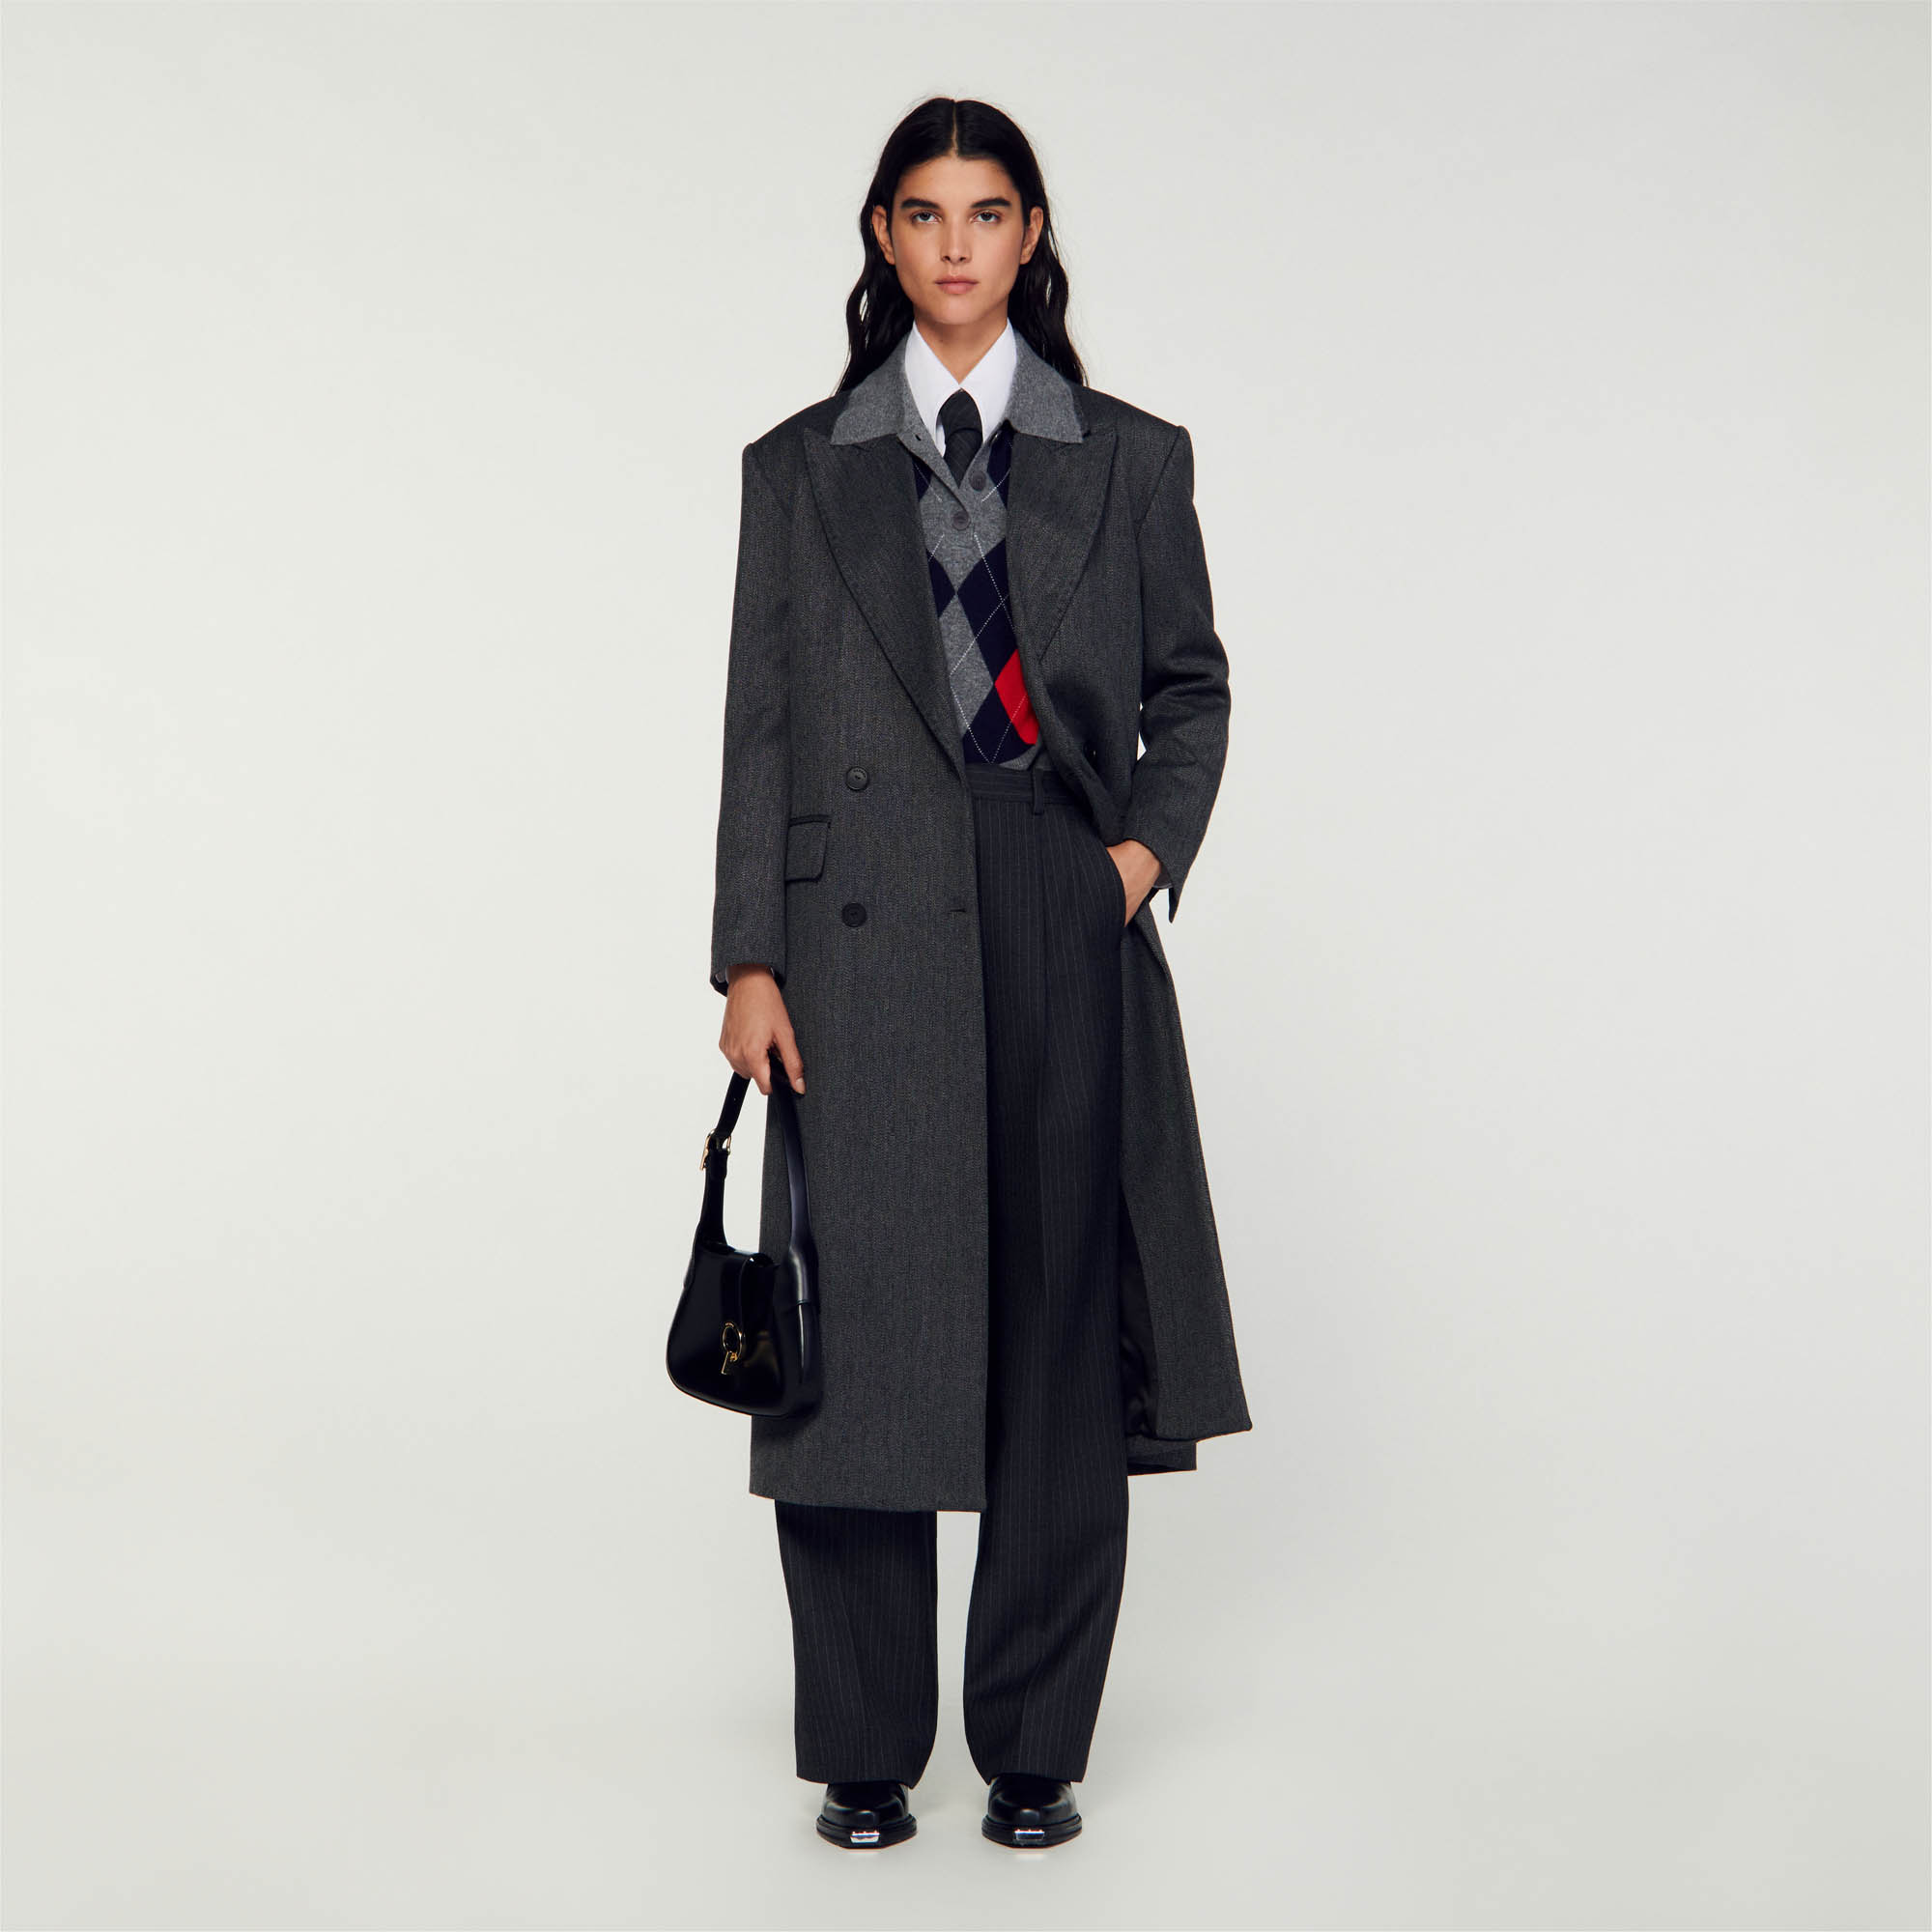 Sandro wool Long double-breasted coat with long sleeves, structured shoulders, suit collar and flap pockets